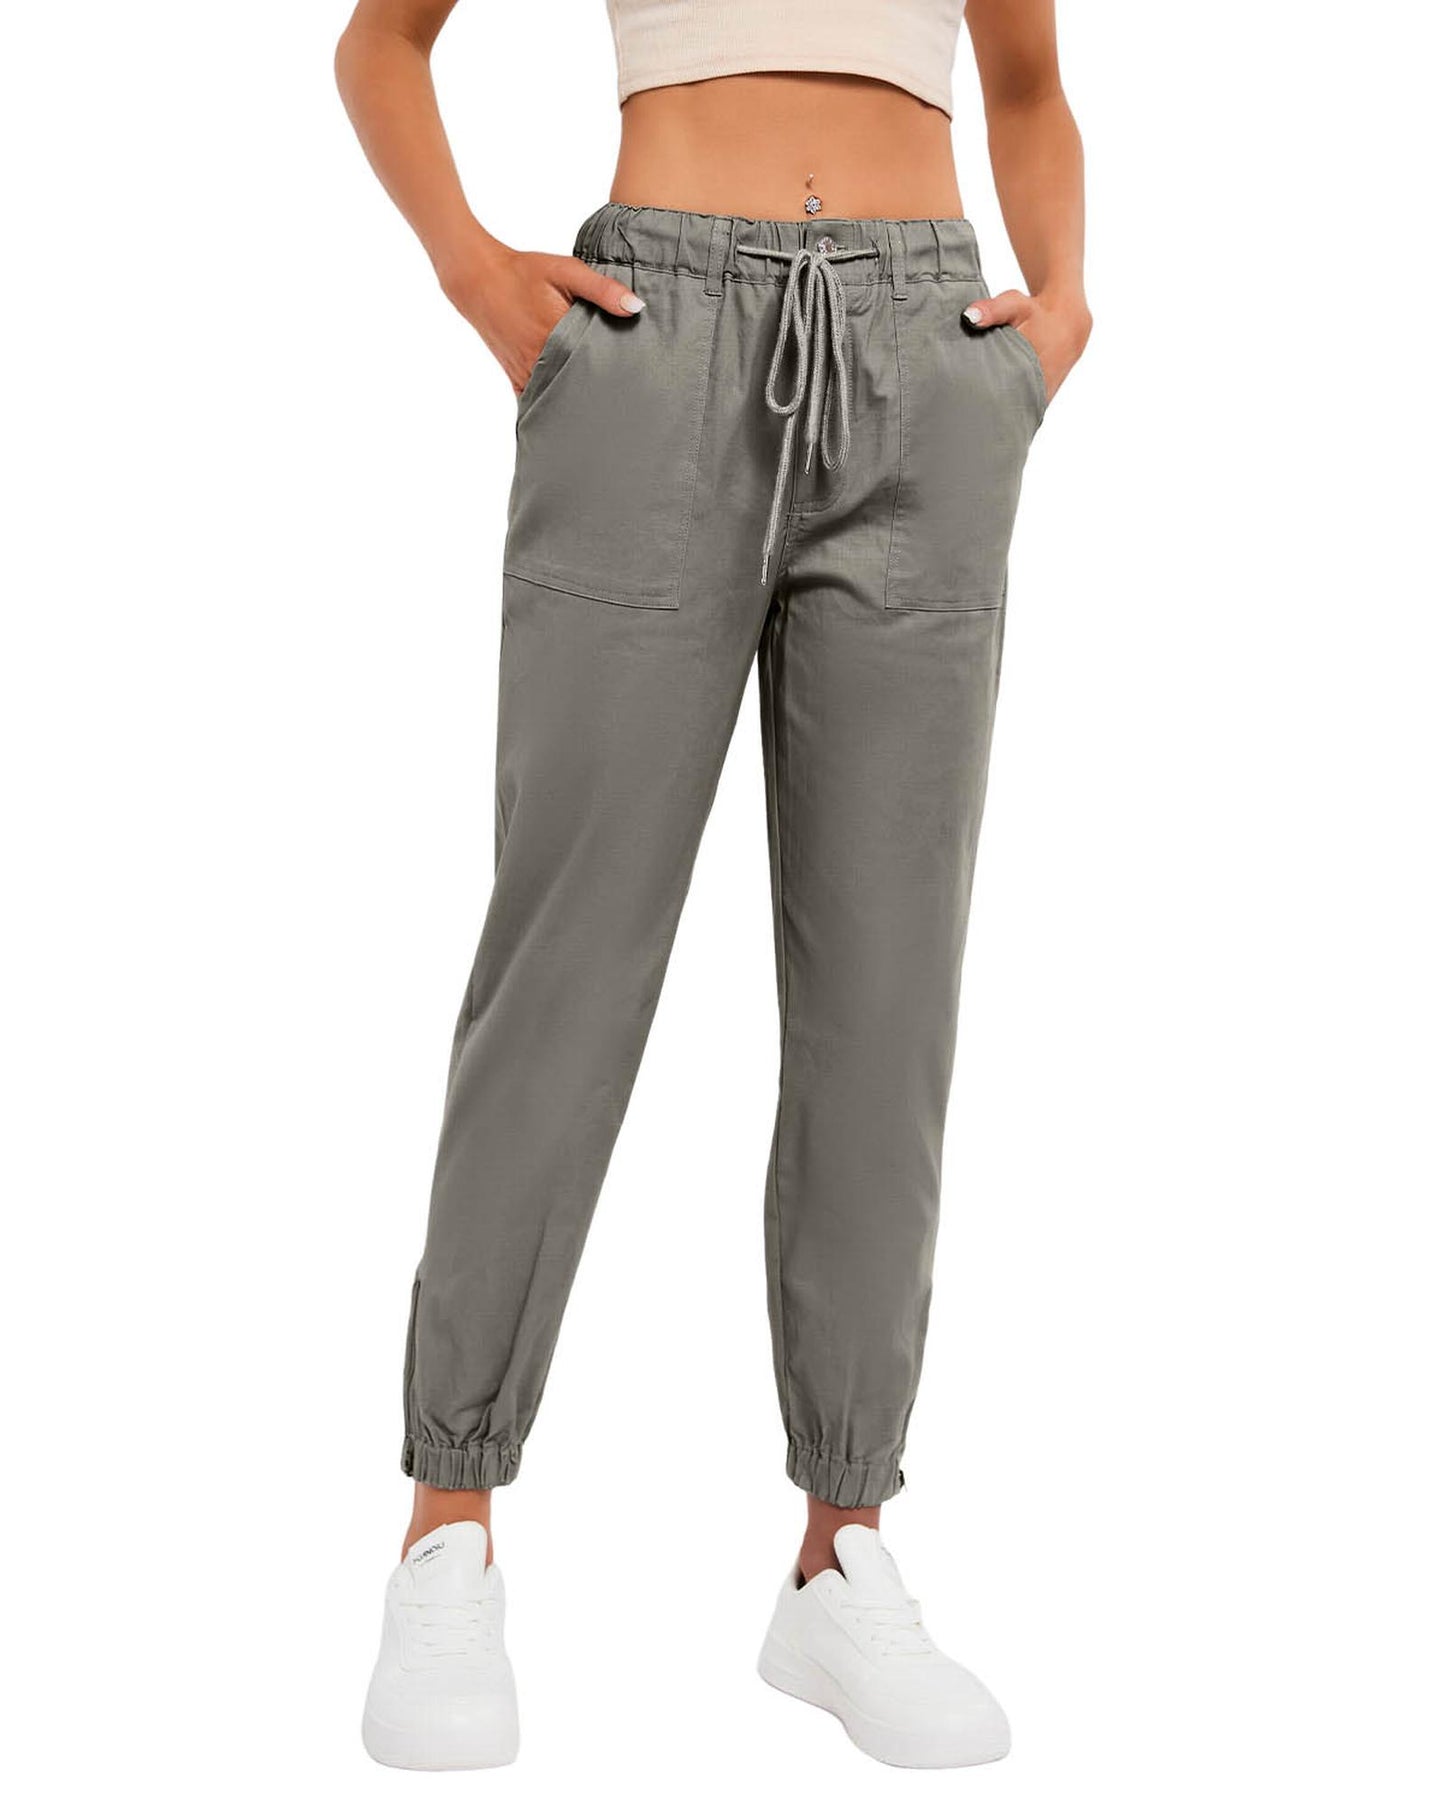 Azura Exchange Pocketed Twill Jogger Pants - S